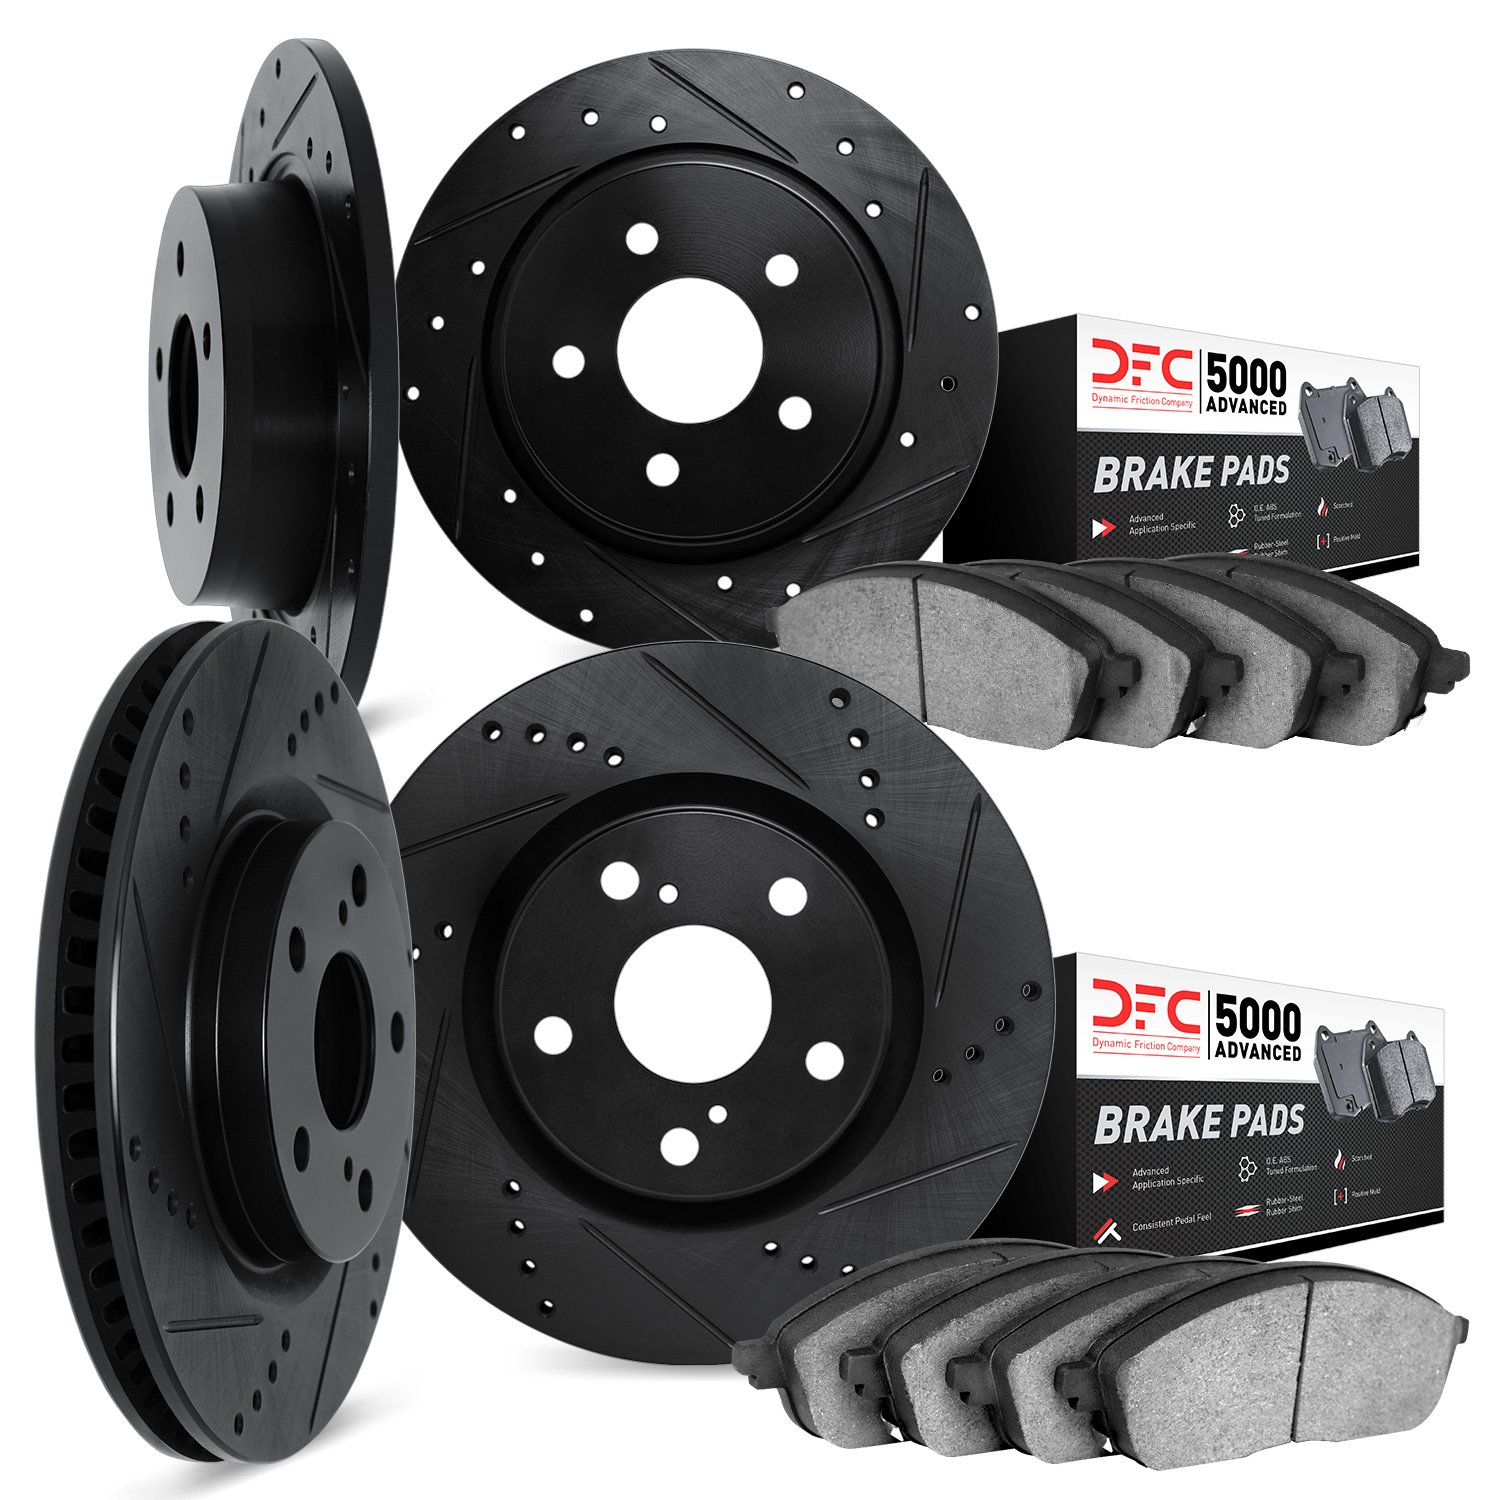 8504-75001 Drilled/Slotted Brake Rotors w/5000 Advanced Brake Pads Kit [Black], 1998-2010 Lexus/Toyota/Scion, Position: Front an